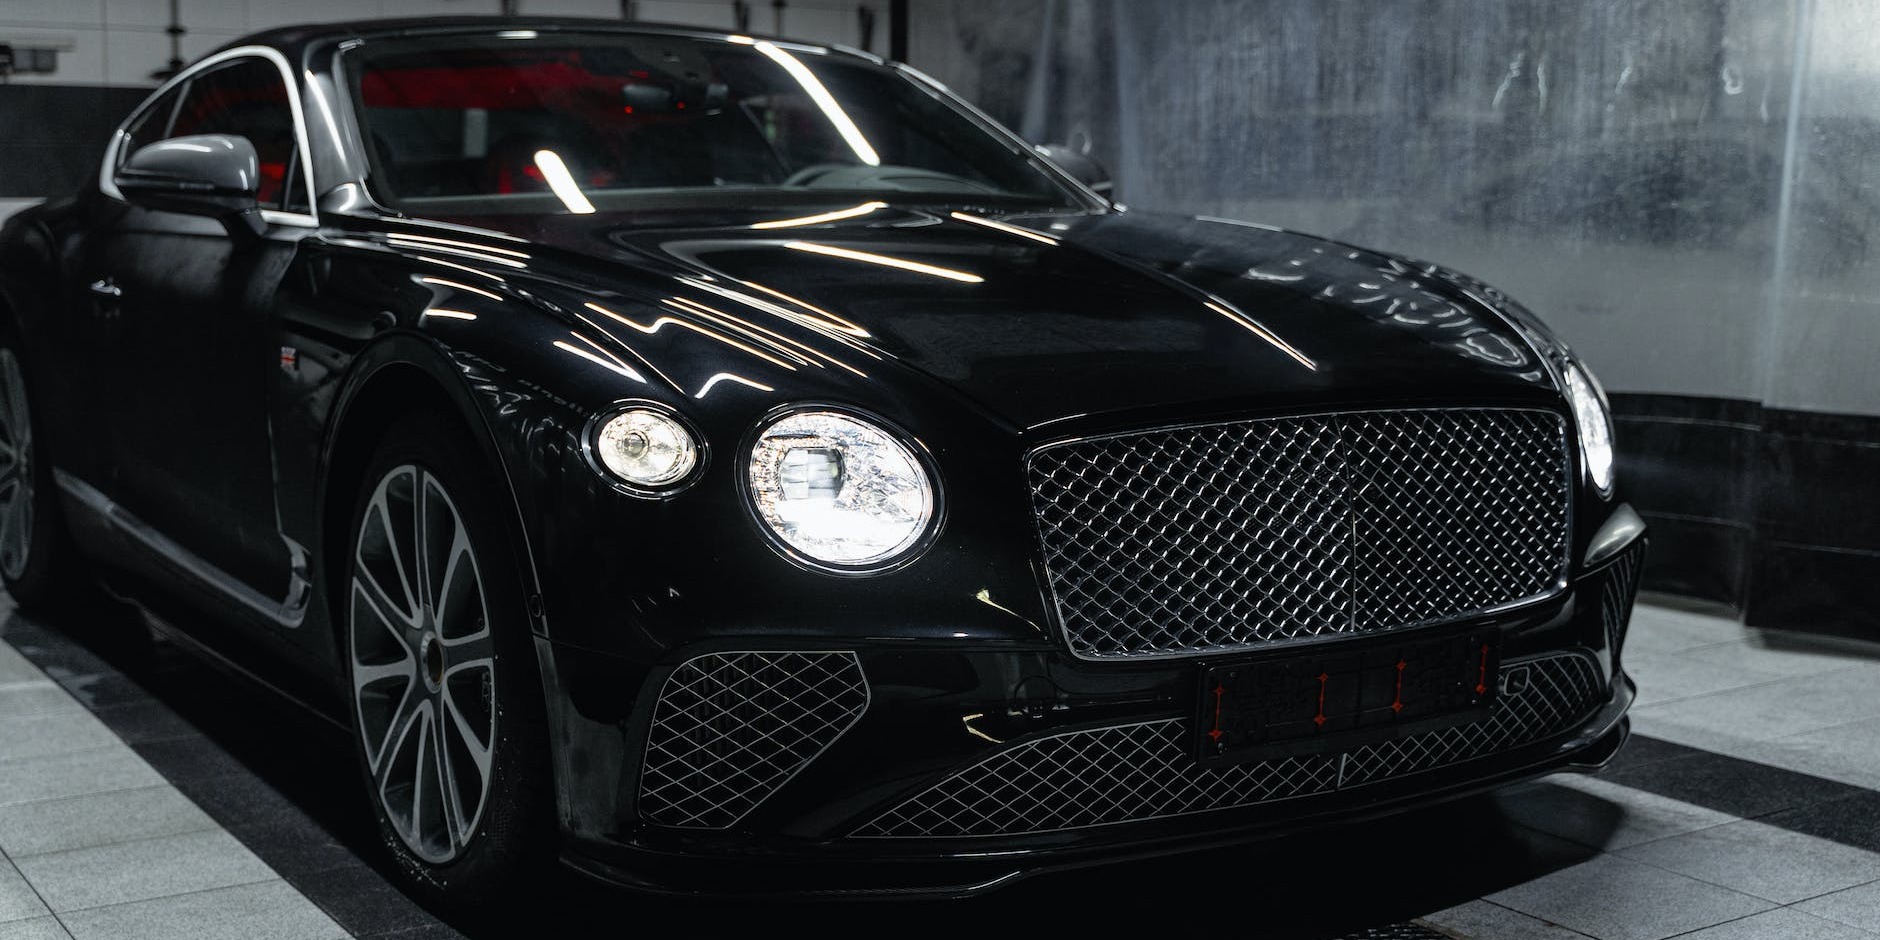 How to Experience Ultimate Luxury with a Bentley on Your Weekend Getaway in Strathclyde